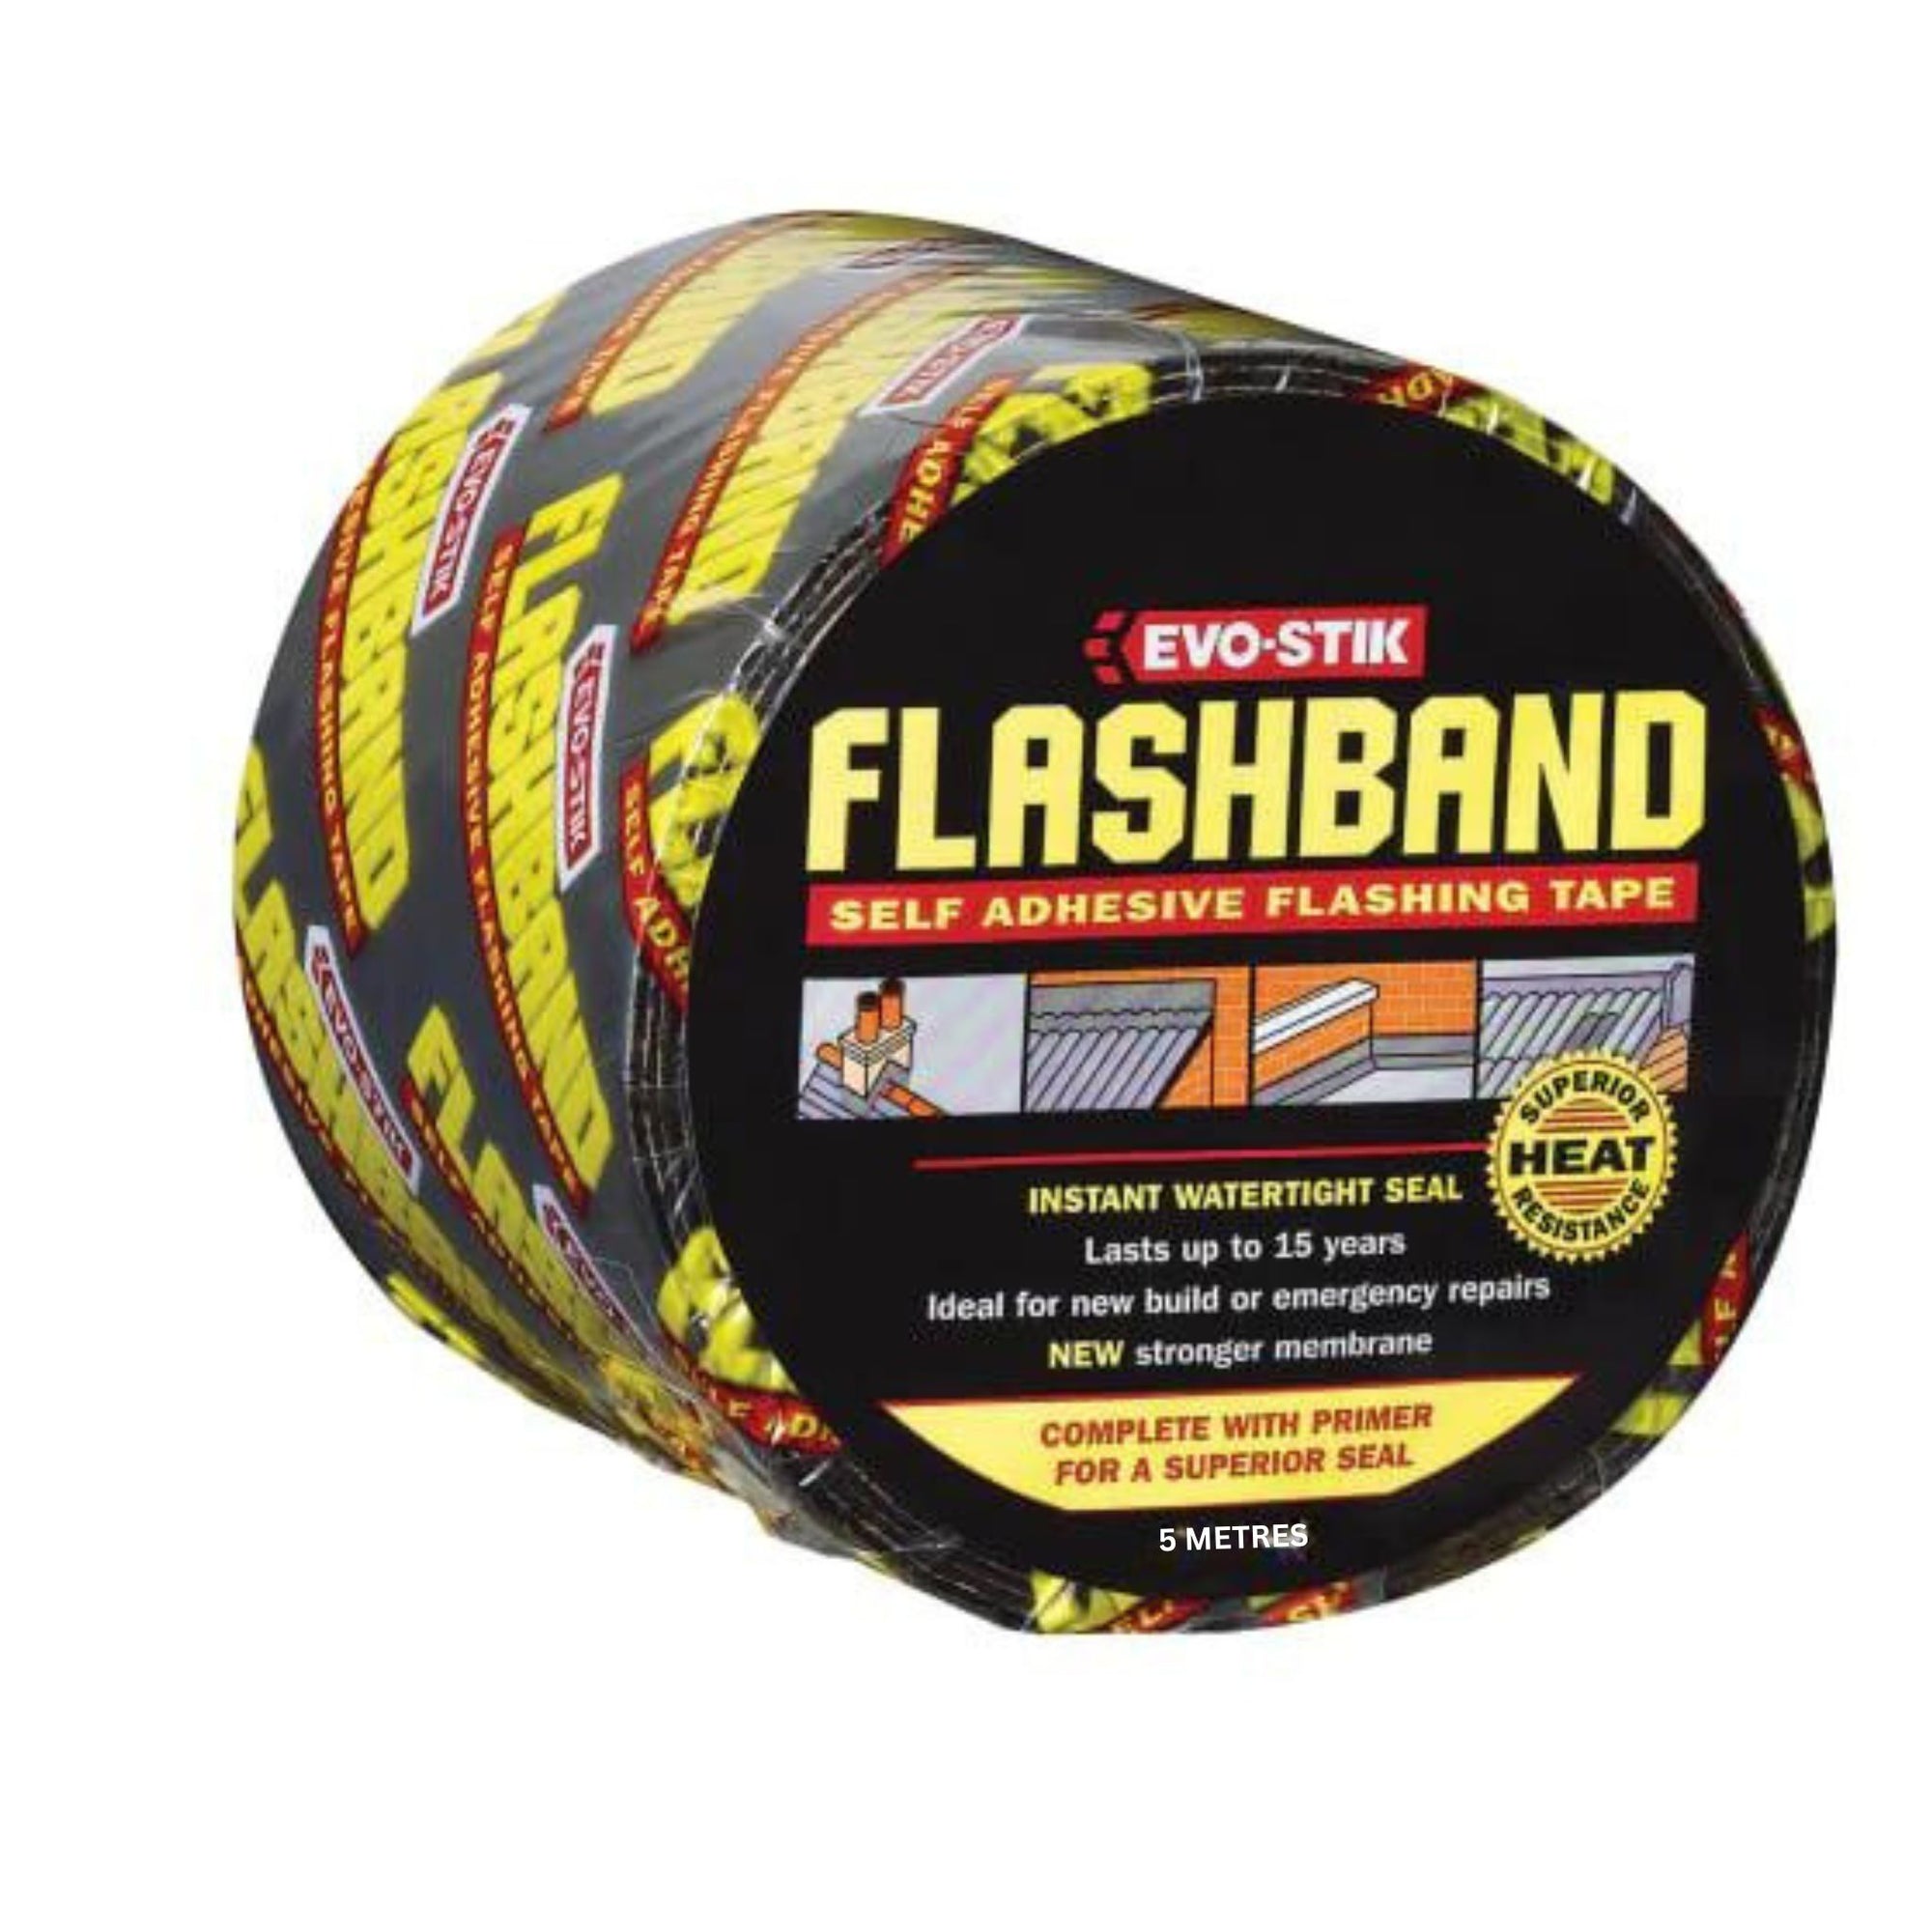 Flashband Self Adhesive Flashing Tape - South East Clearance Centre